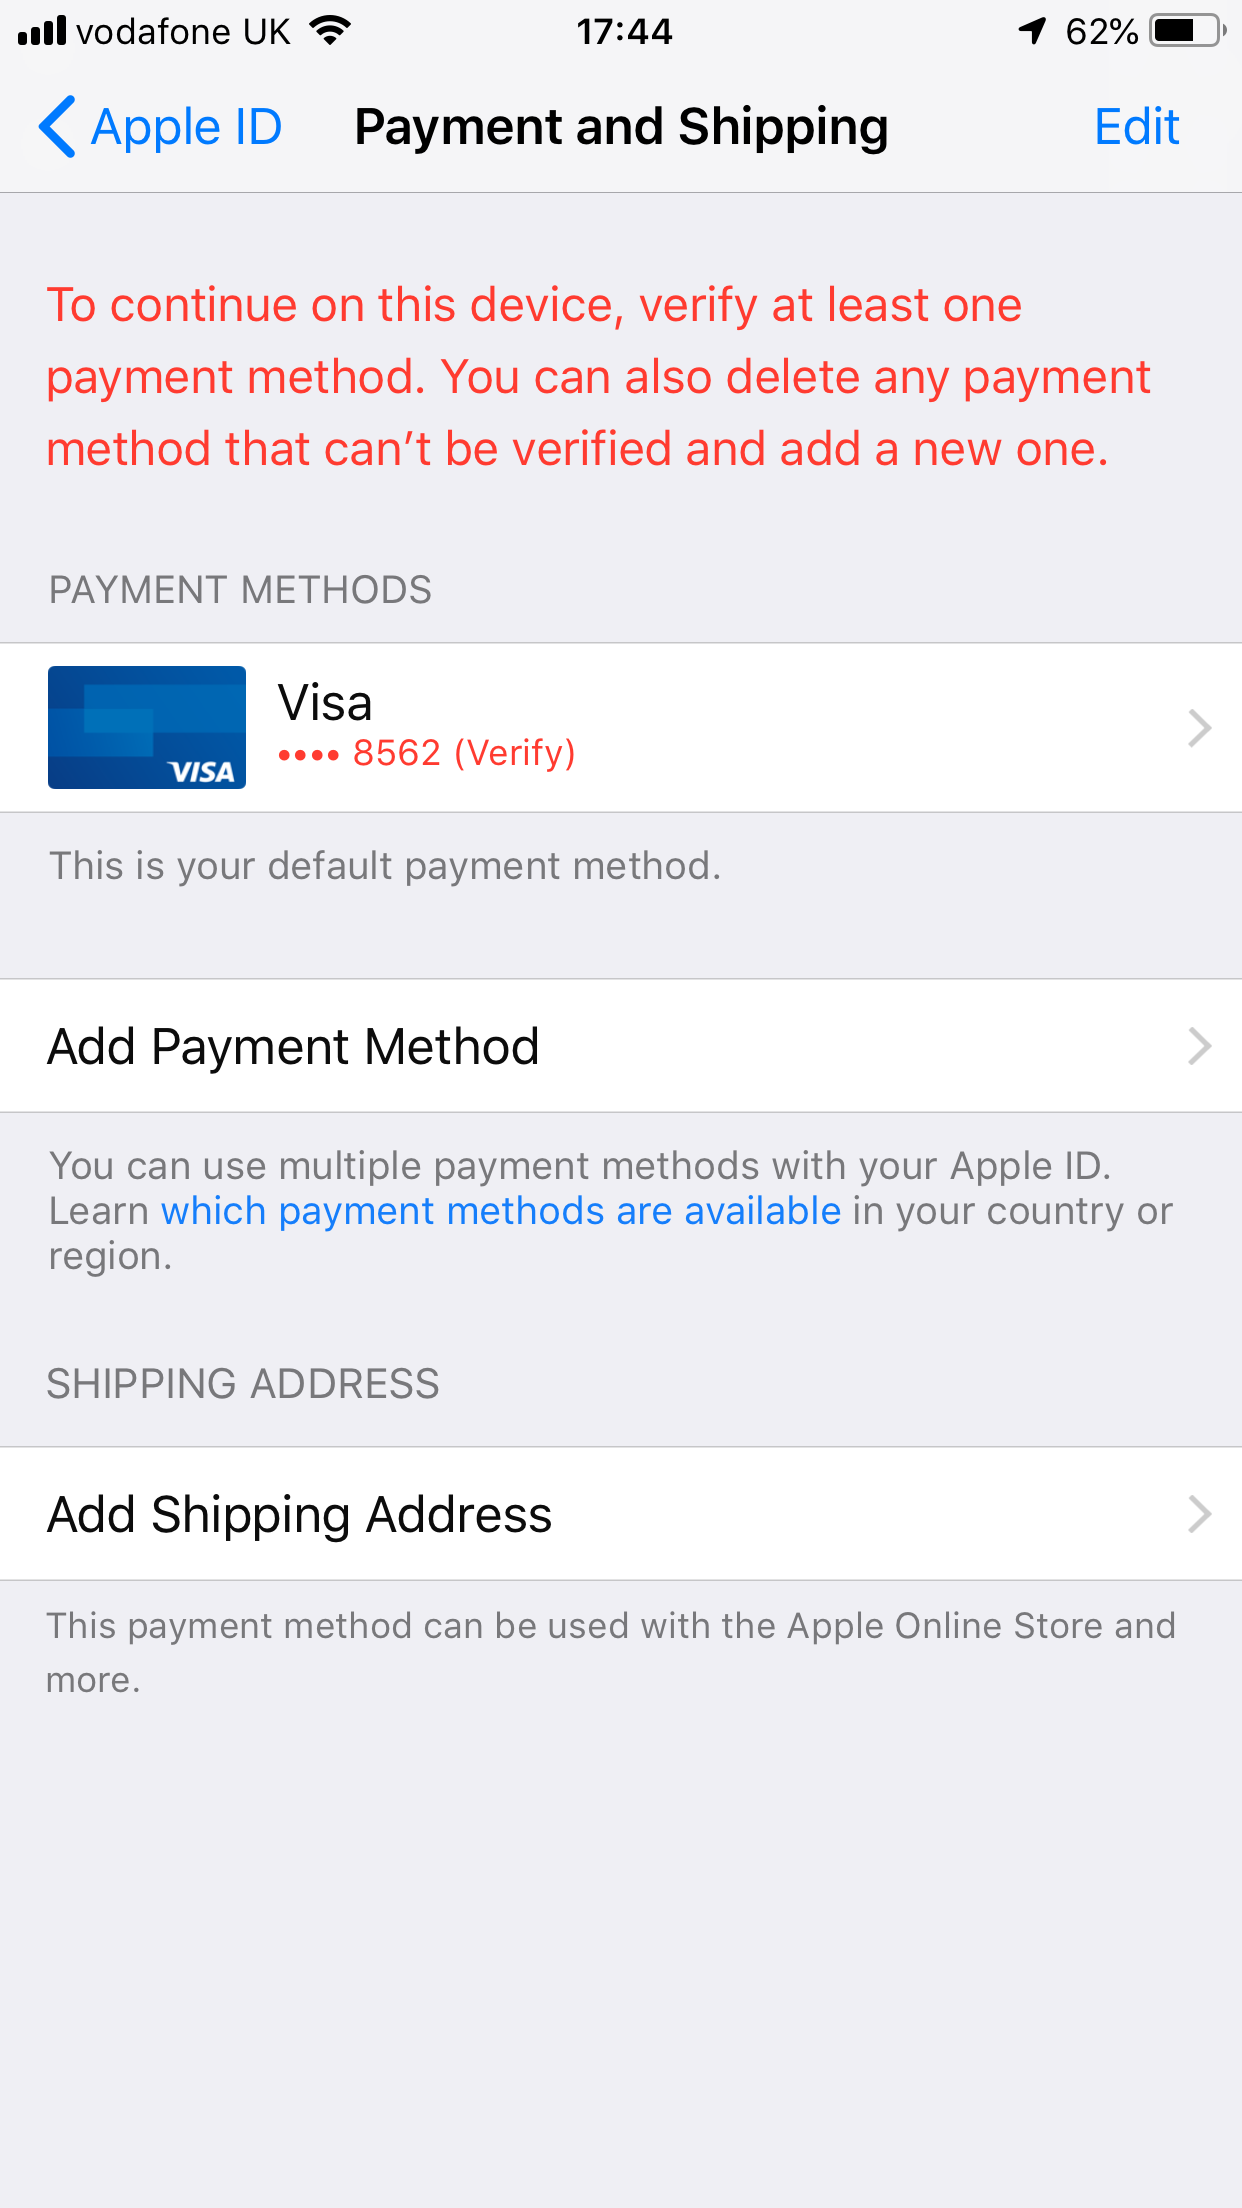 Why can't I remove a payment method from iPhone?